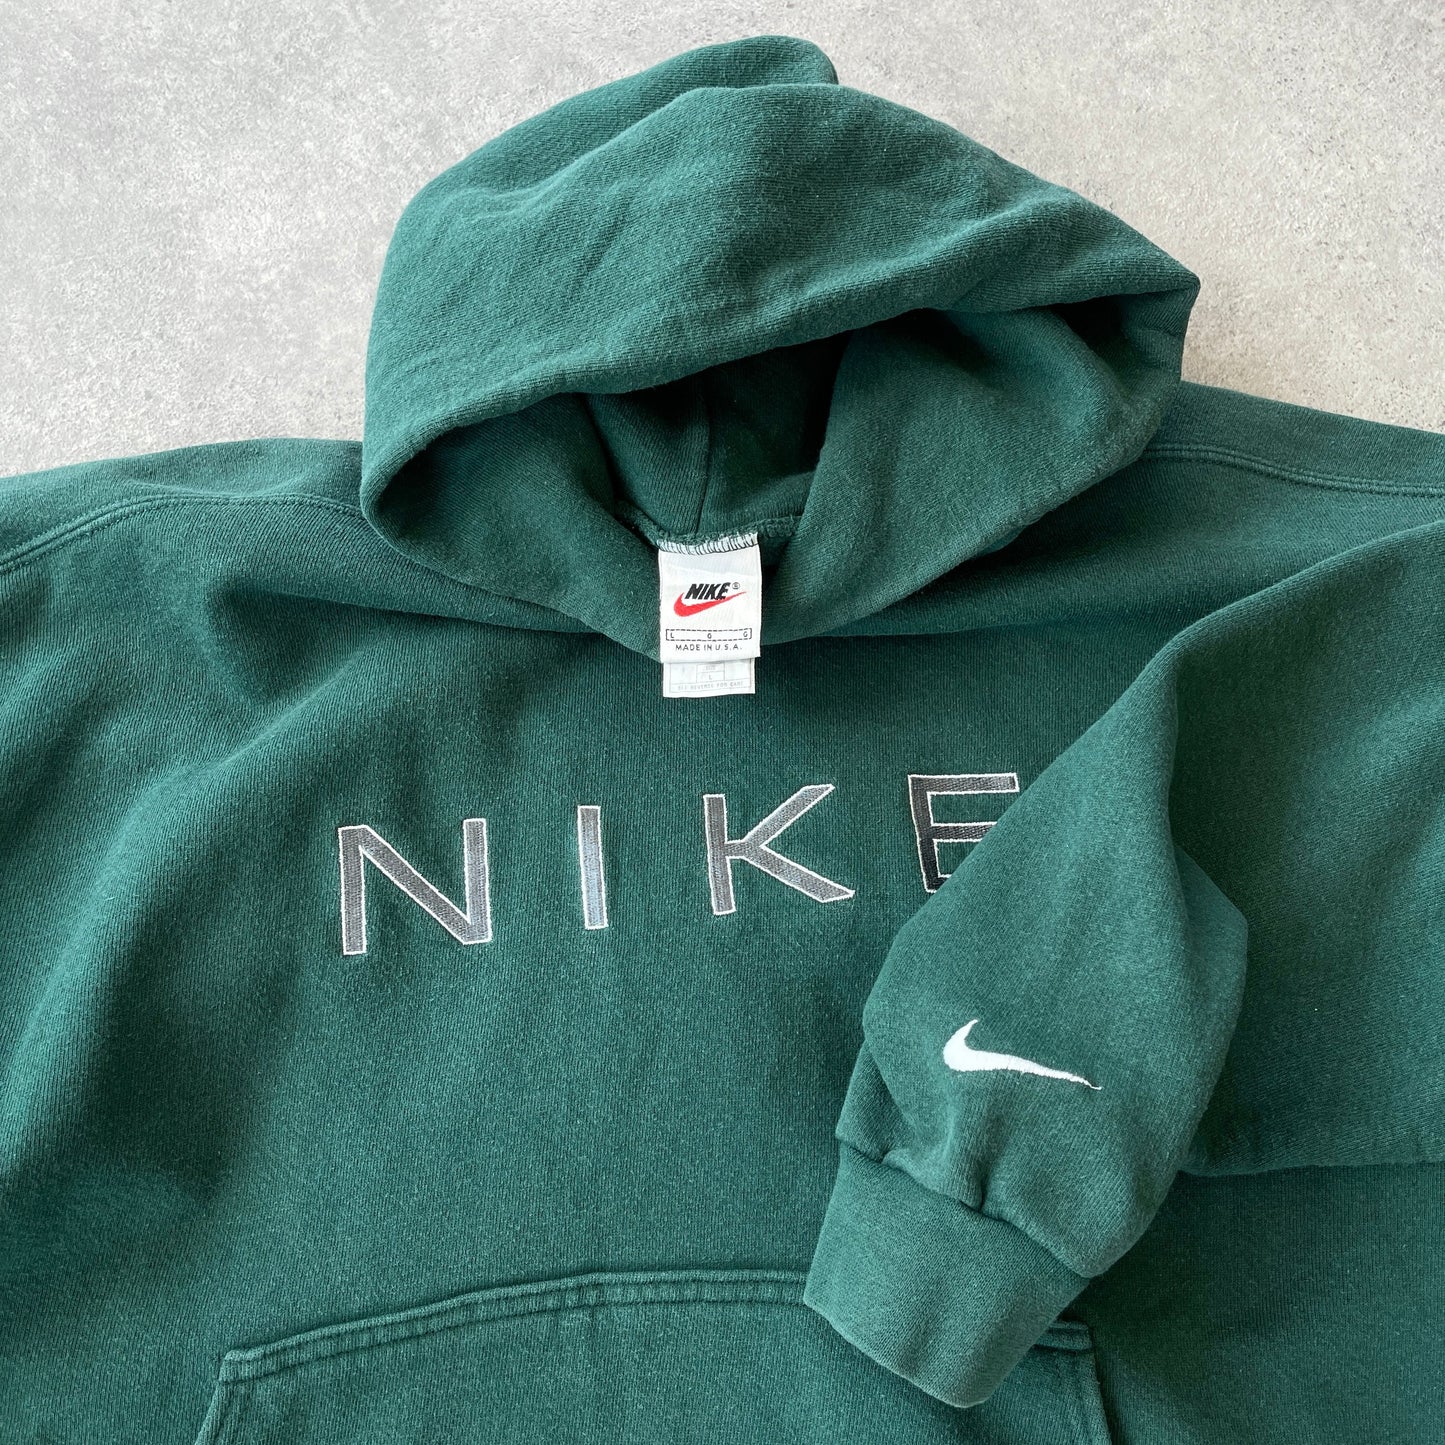 Nike RARE 1990s heavyweight embroidered hoodie (L)